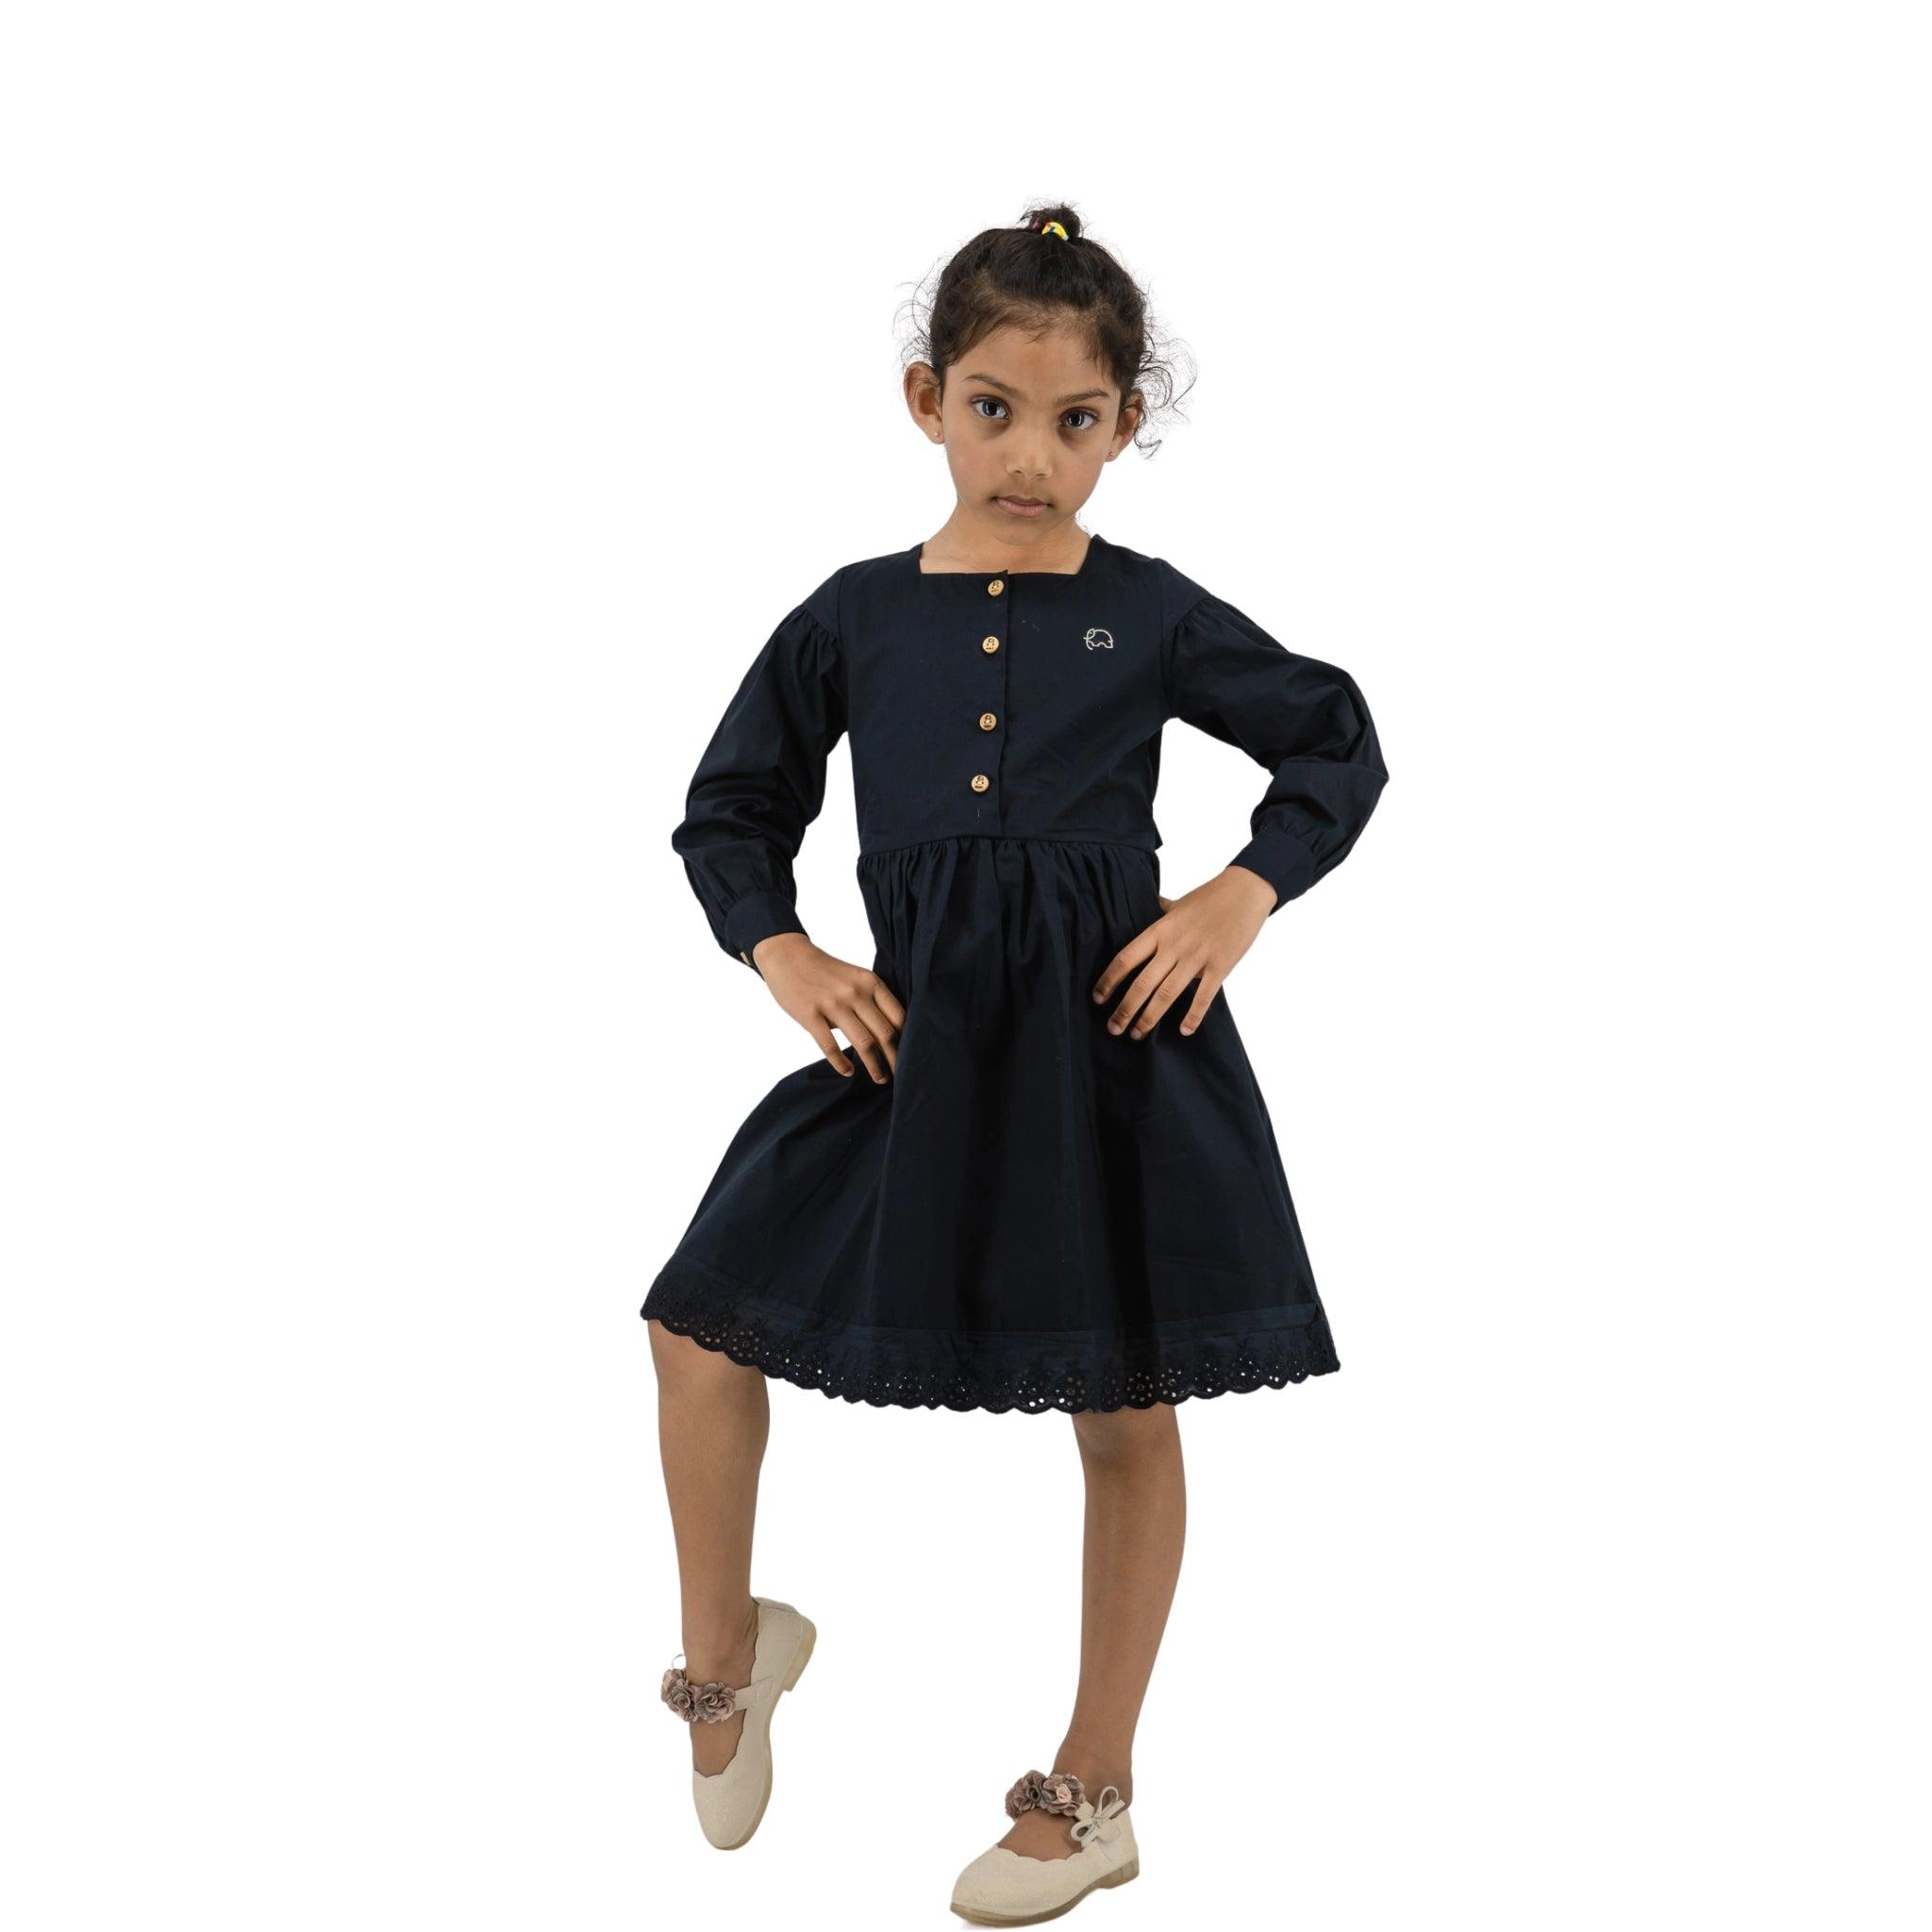 Young girl in a navy blue dress with long puff sleeves standing confidently with hands on her hips against a white background.

Product Name: Black Long Puff Sleeve Cotton Dress
Brand Name: Karee

Revised Sentence: Young girl in a Karee black long puff sleeve cotton dress standing confidently with hands on her hips against a white background.